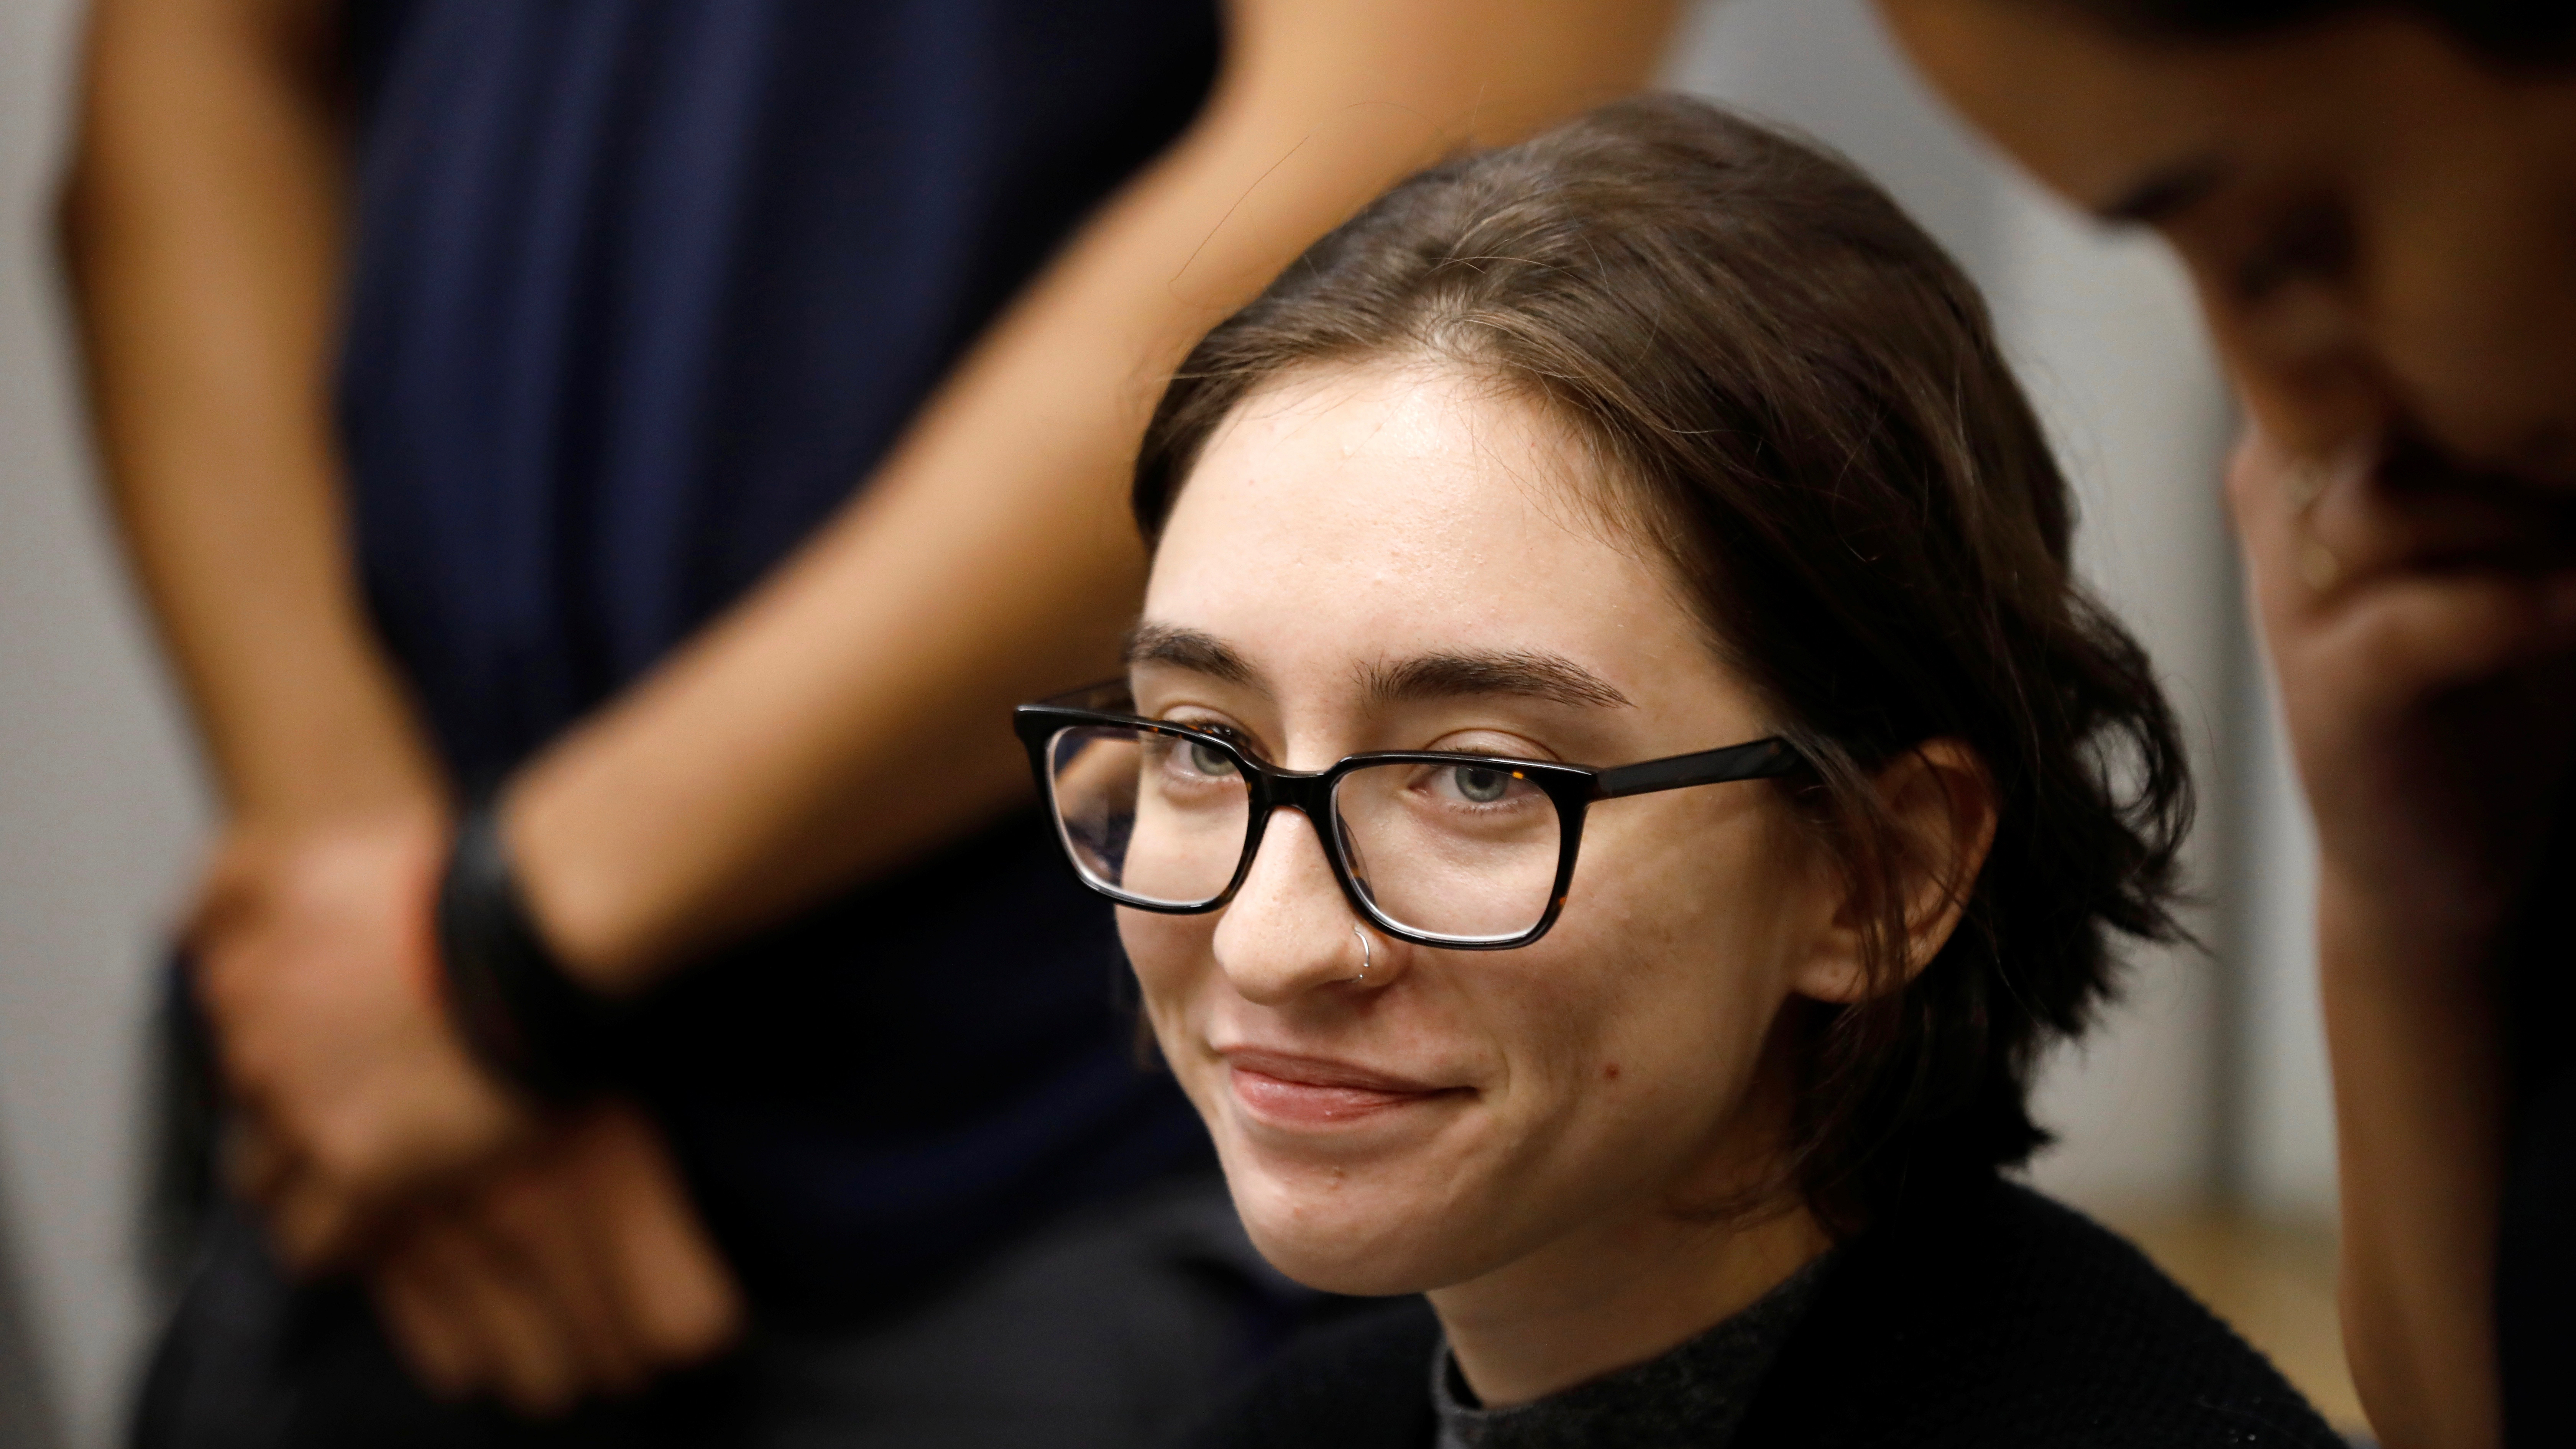 American student Lara Alqasem, 22, appears at the district court in Tel Aviv, Israel October 11, 2018. She wants to study at Hebrew University. But Israeli authorities are questioning her politics. 